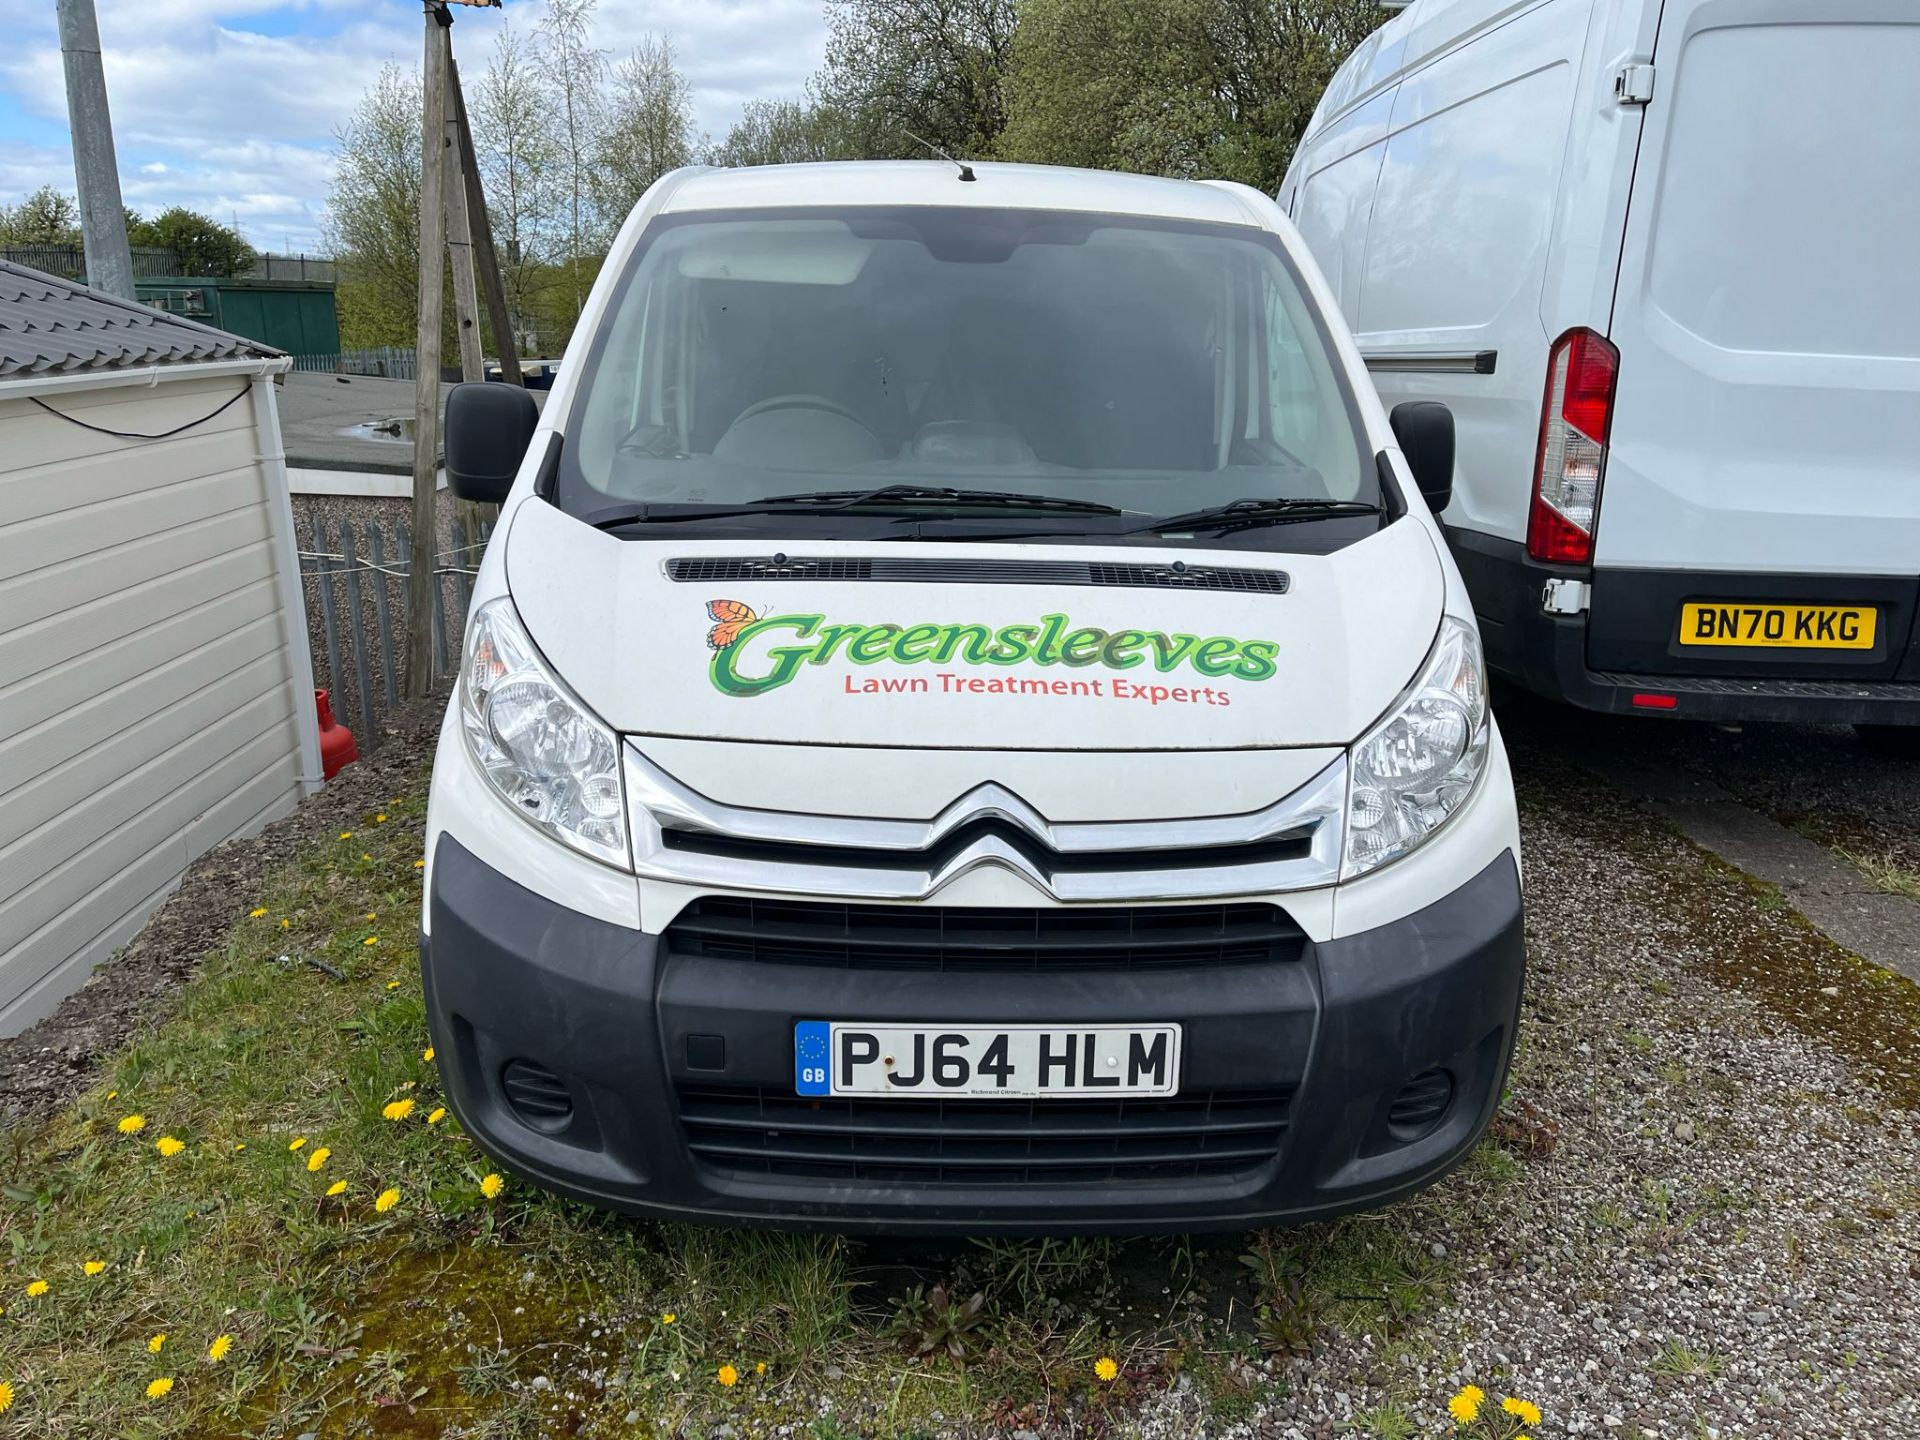 (NO VAT ON HAMMER) >>>SPECIAL CLEARANCE<<< 2014 CITROEN DISPATCH 1000 L1H1 1.6 HDI - NON-RUNNER - Image 3 of 5